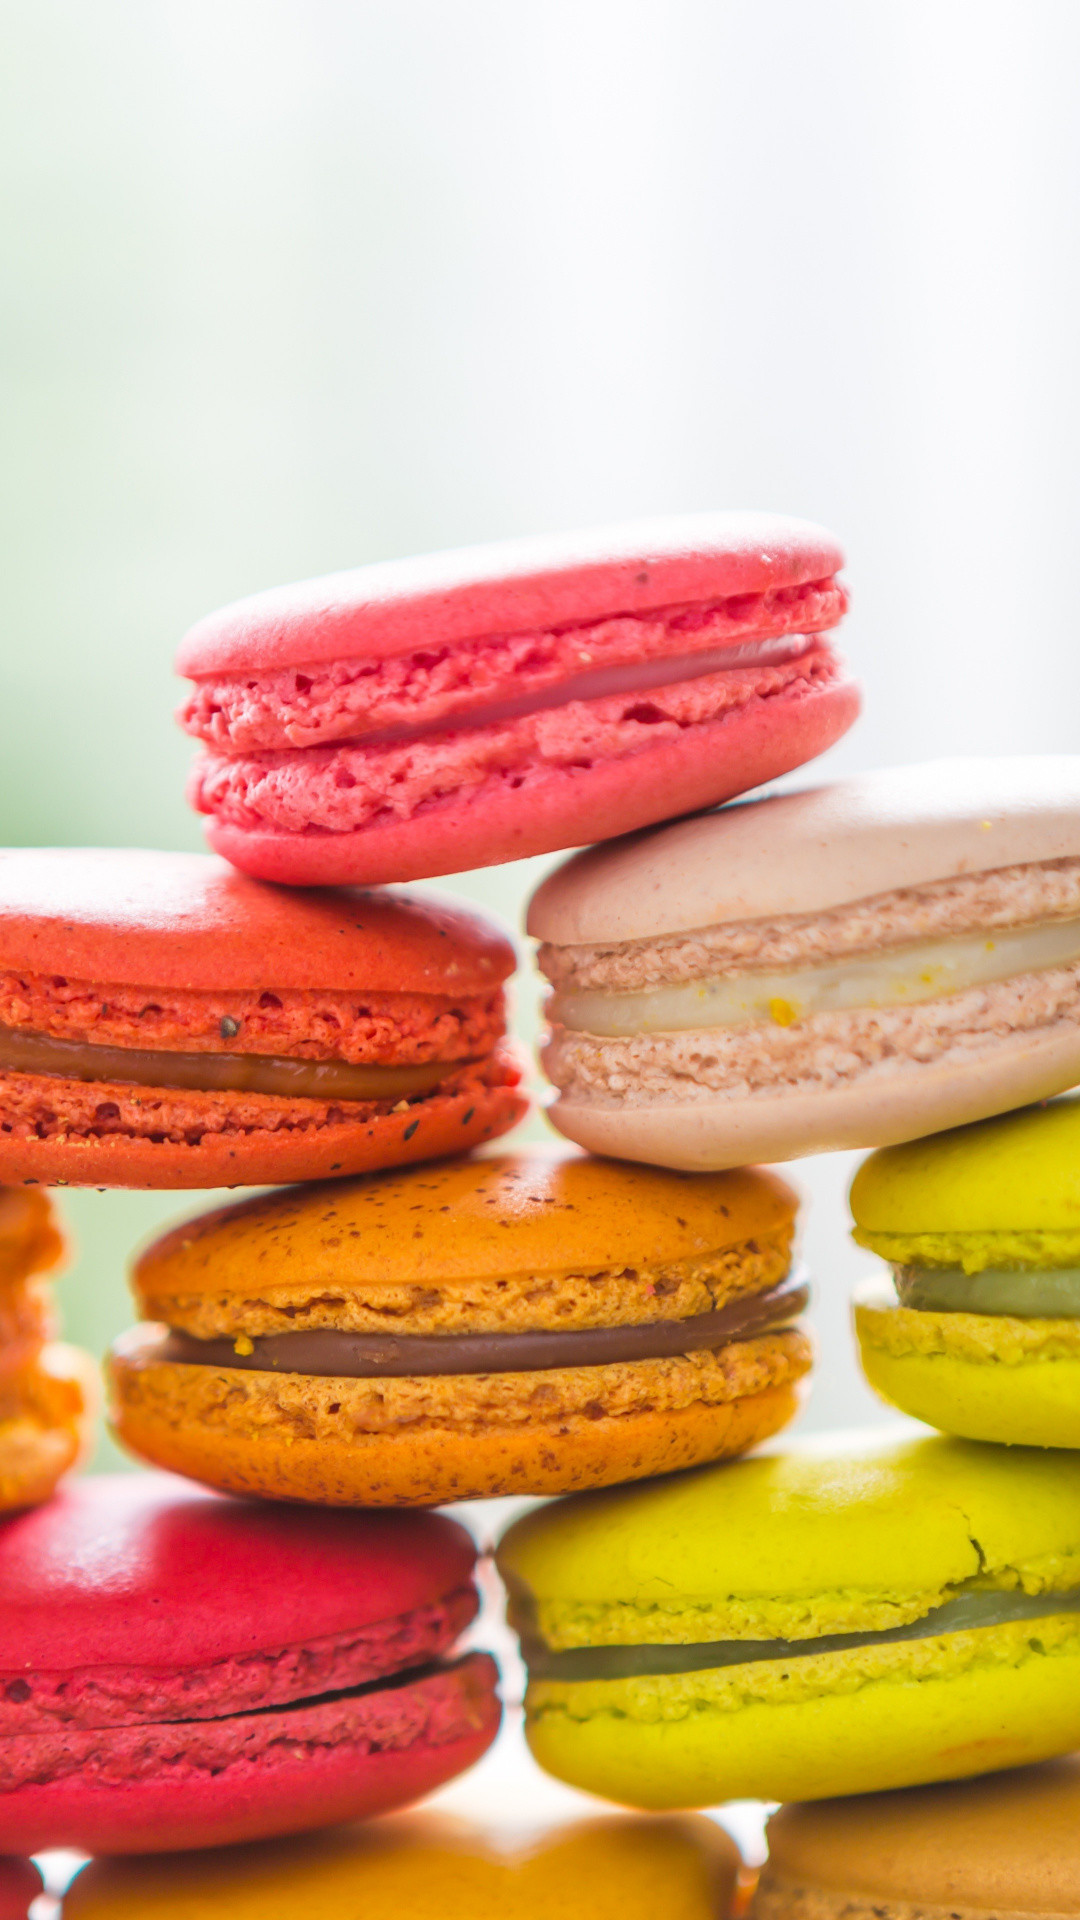 1080x1920  wallpaper Macaron, colorful, sweets, food, arranged